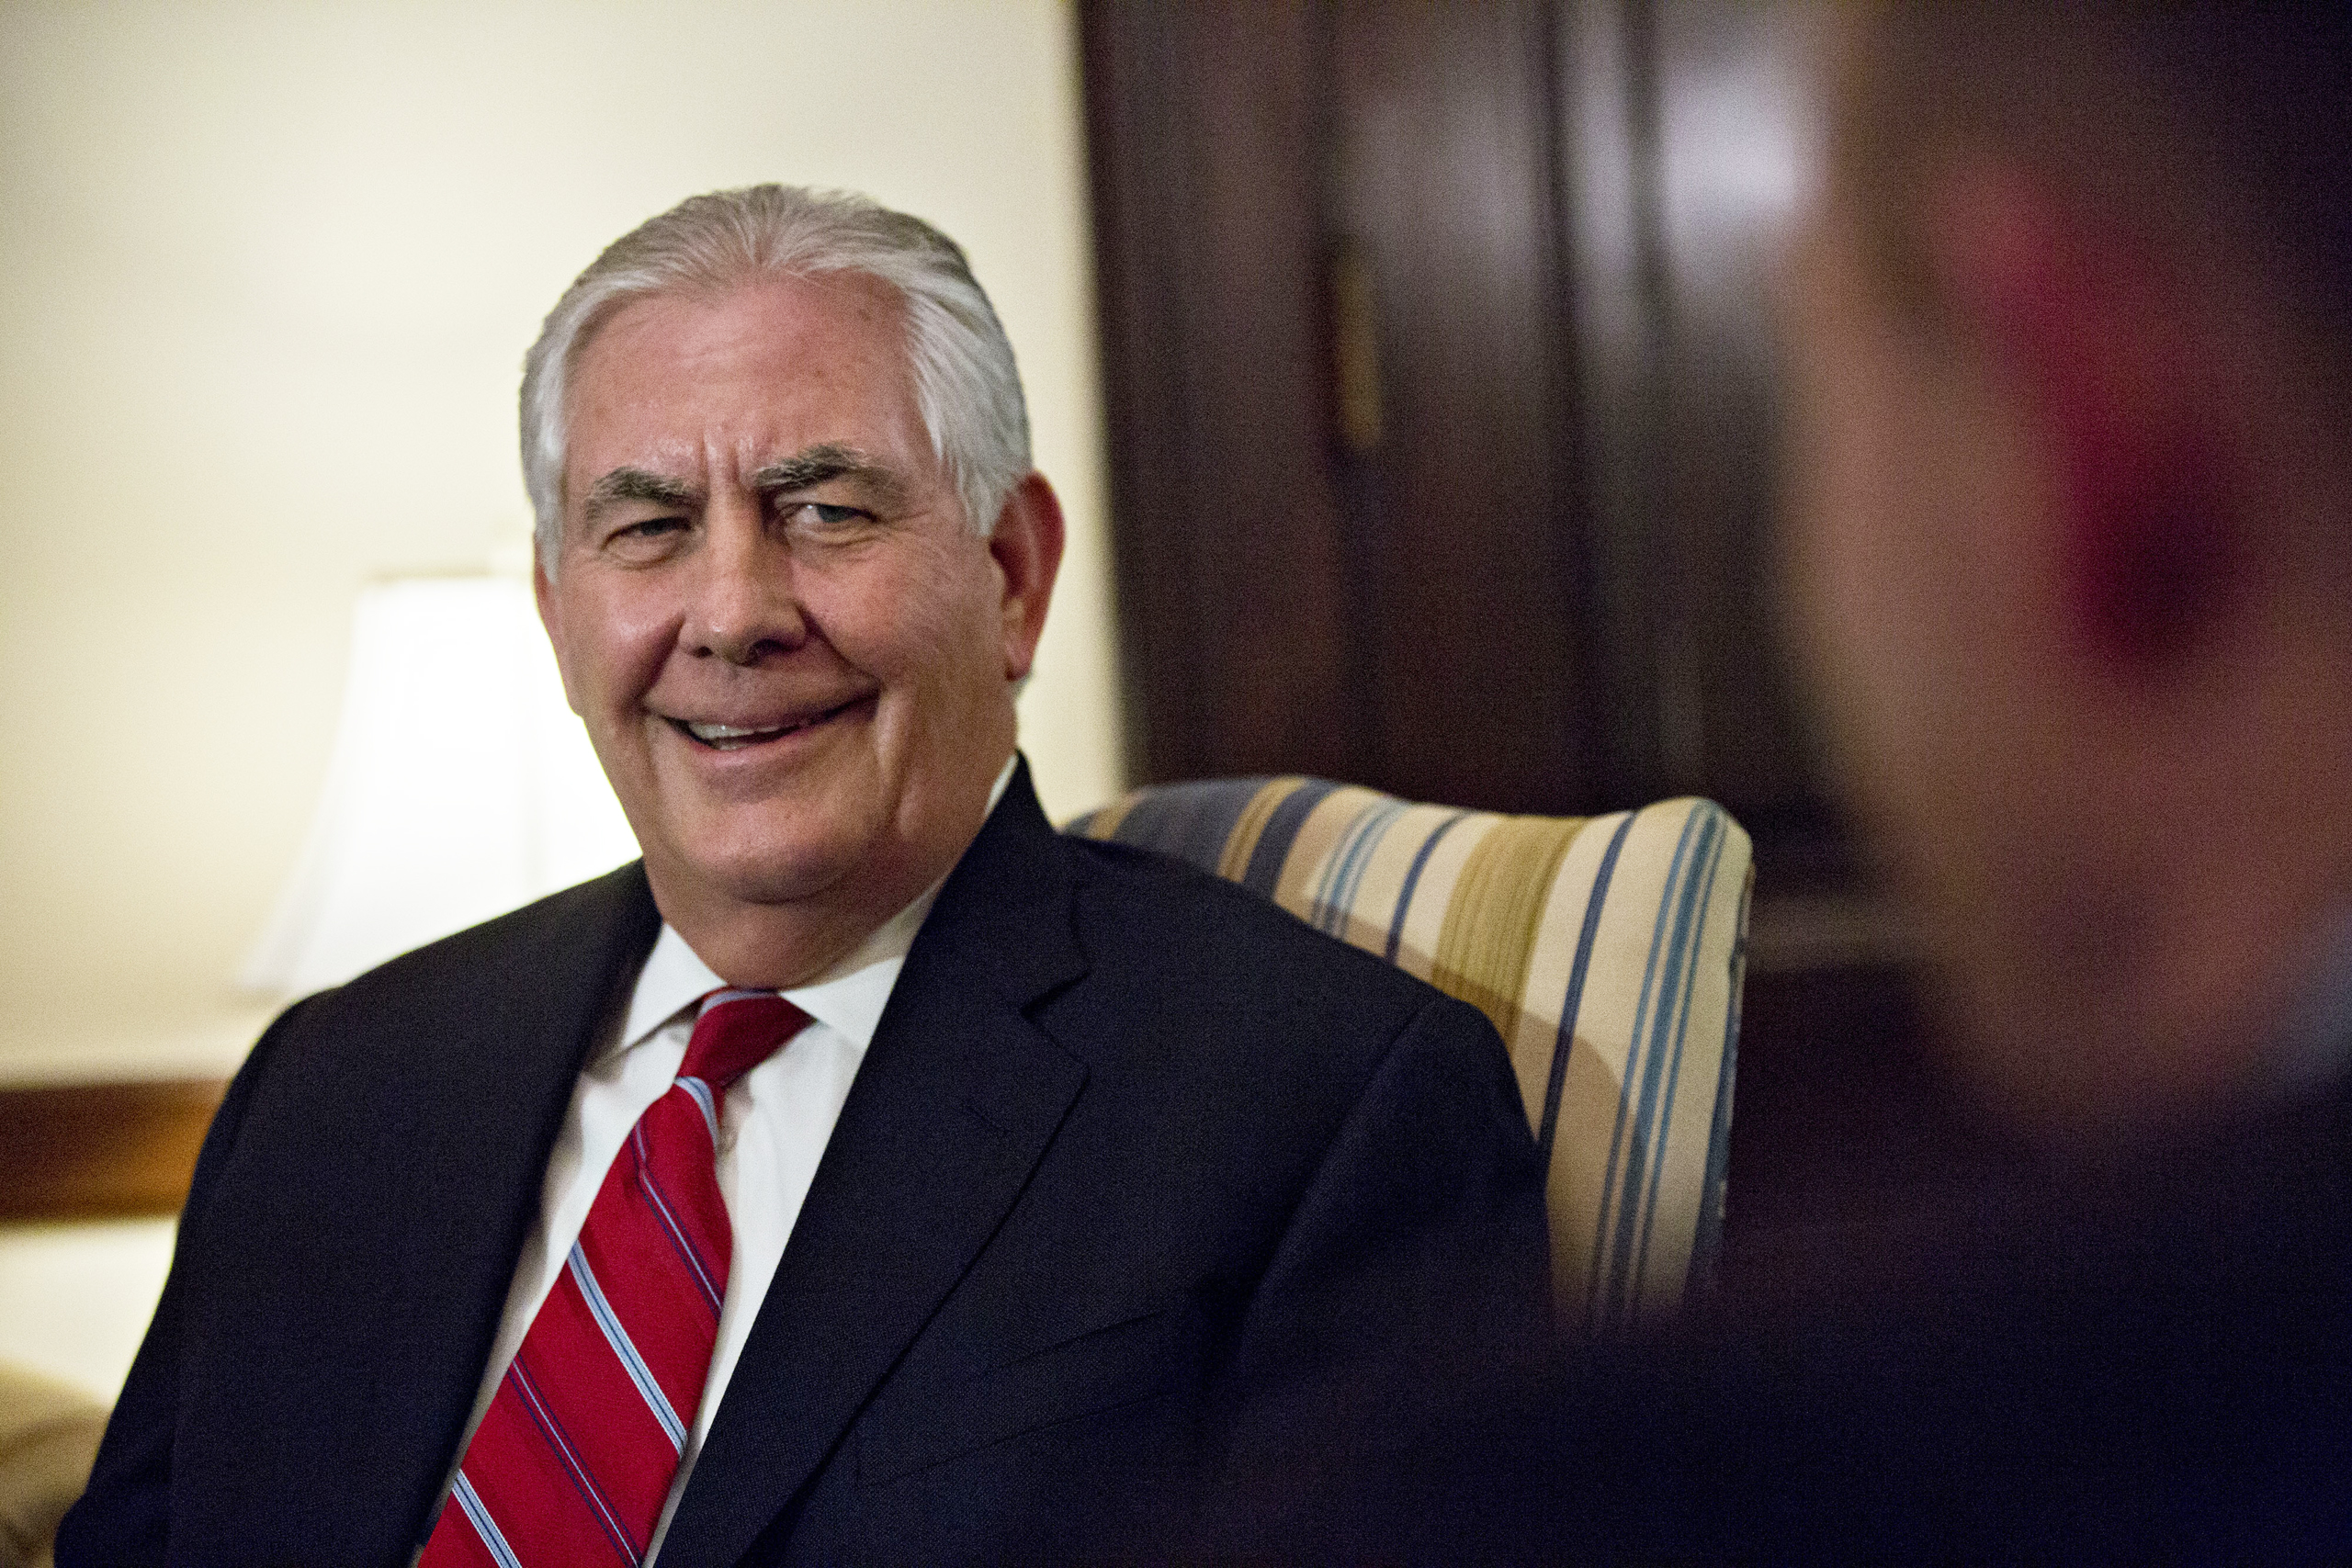 Rex Tillerson, the former chief executive officer of Exxon Mobile Corp. and U.S. secretary of state nominee for president-elect Donald Trump, smiles as he meets with Senator Christopher "Chris" Coons, a Democrat from Delaware, right, on Capitol Hill in Washington, D.C., on  Jan. 4, 2017. (Andrew Harrer—Bloomberg/Getty Images)